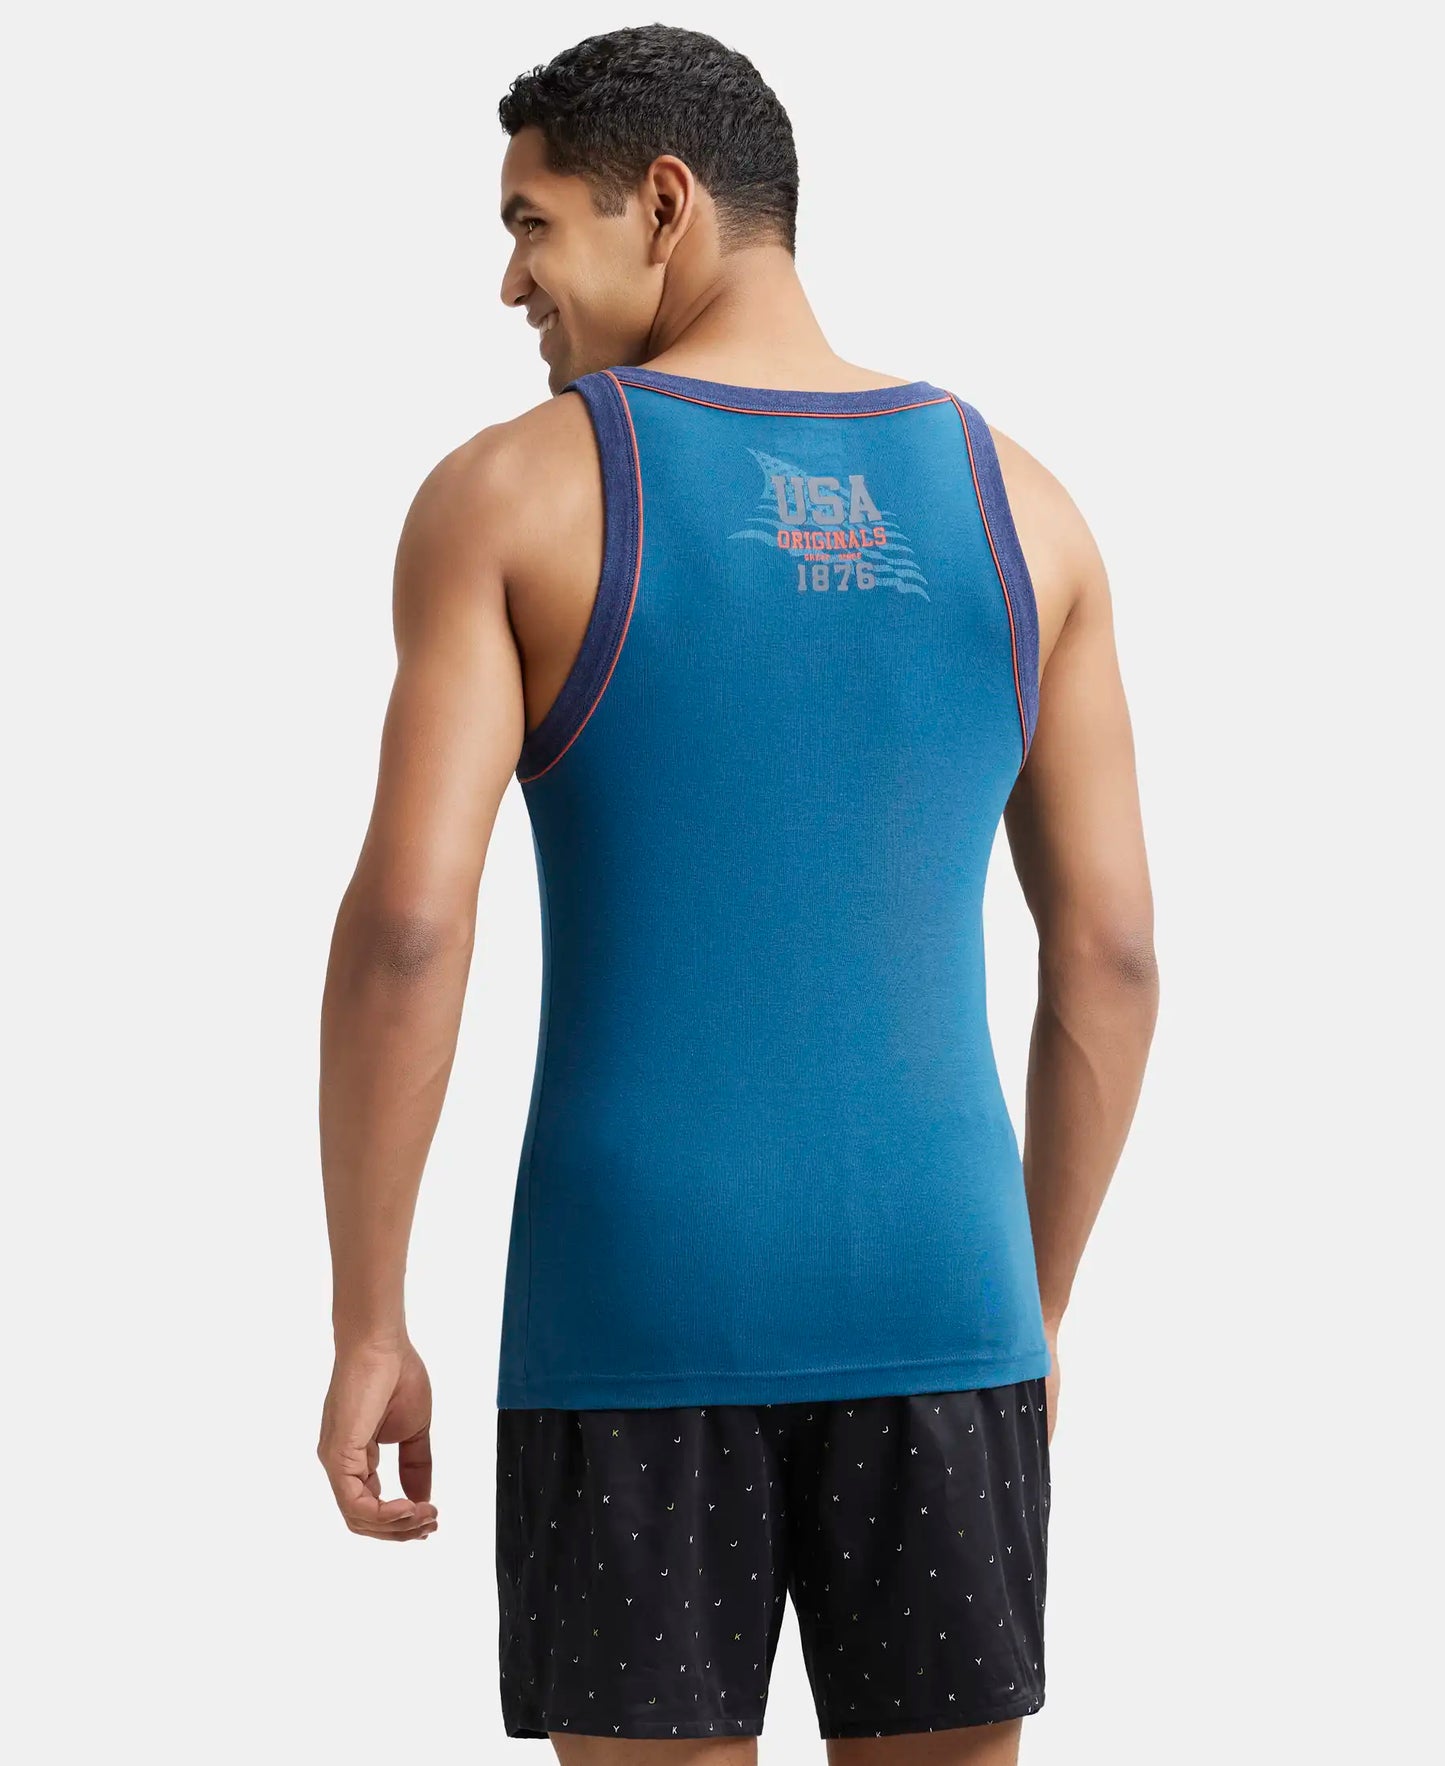 Super Combed Cotton Rib Square Neck Gym Vest with Graphic Print - Seaport Teal-3